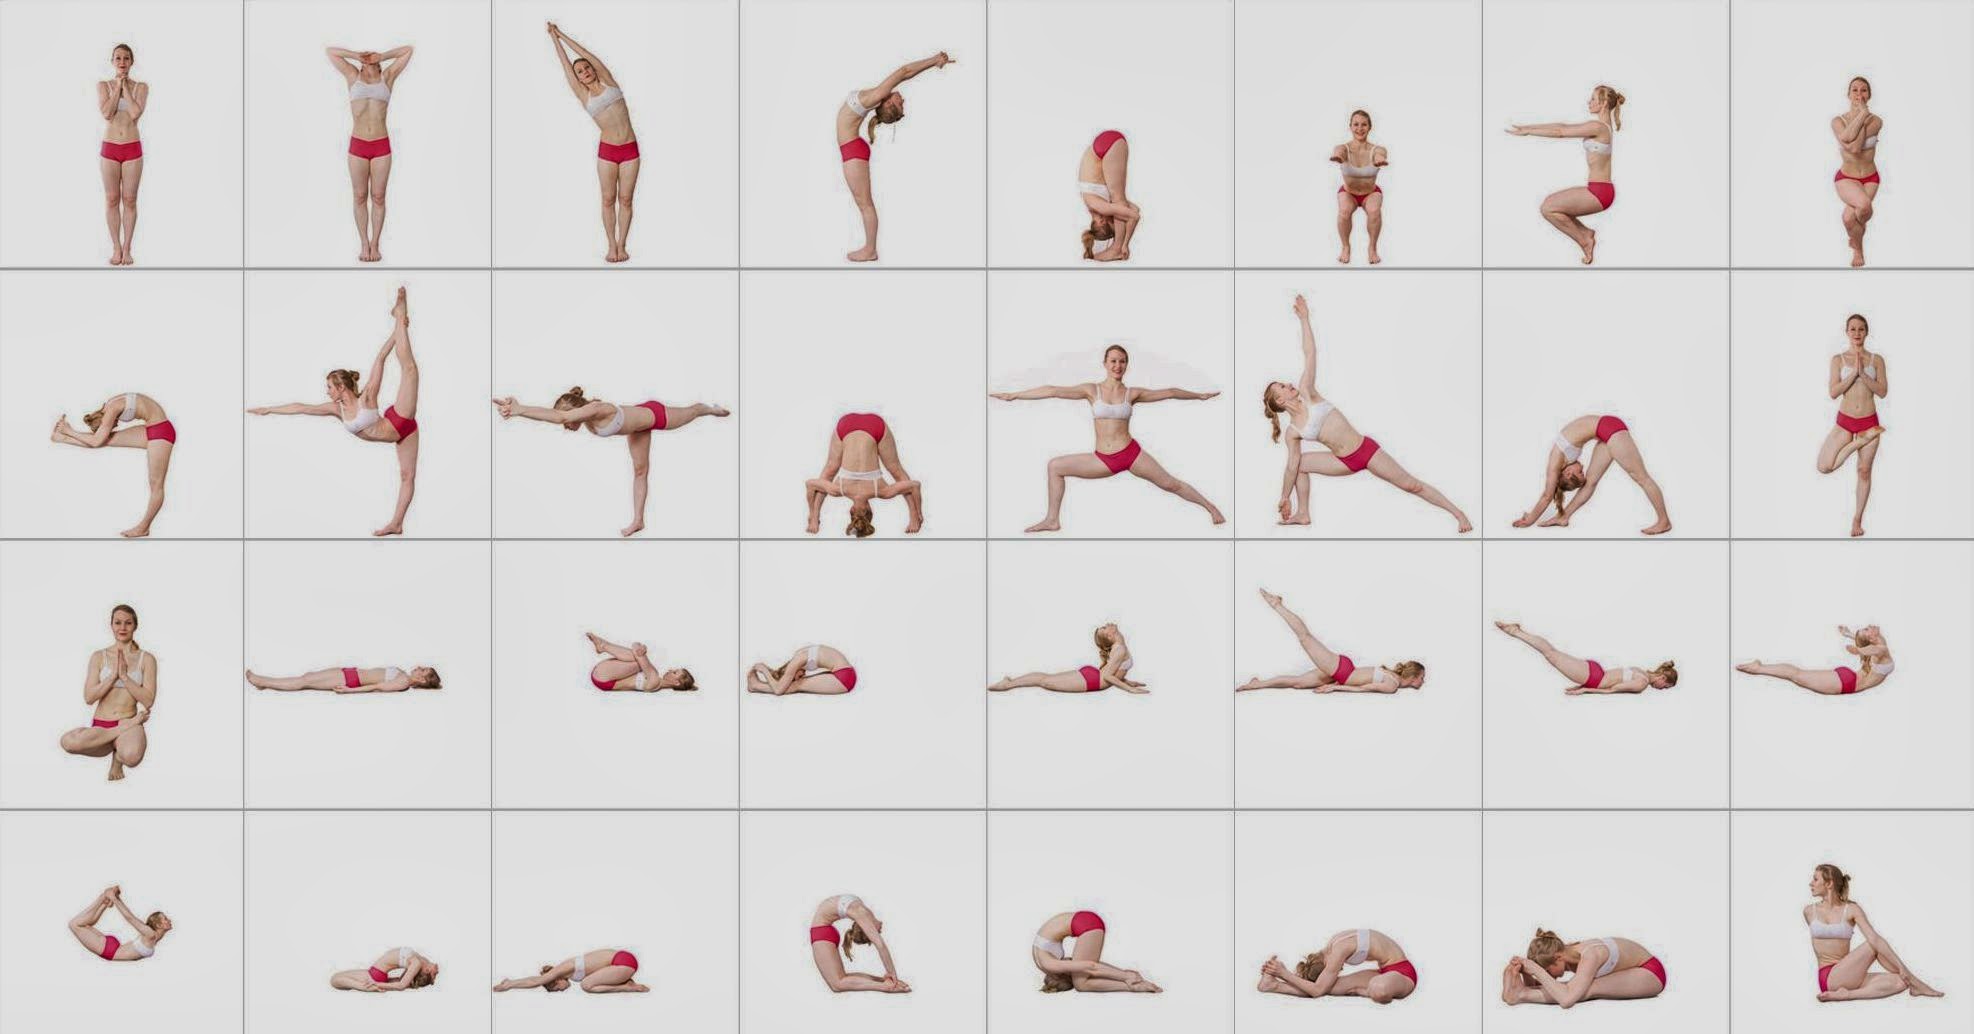 Any health effects from practicing Bikram yoga? 7